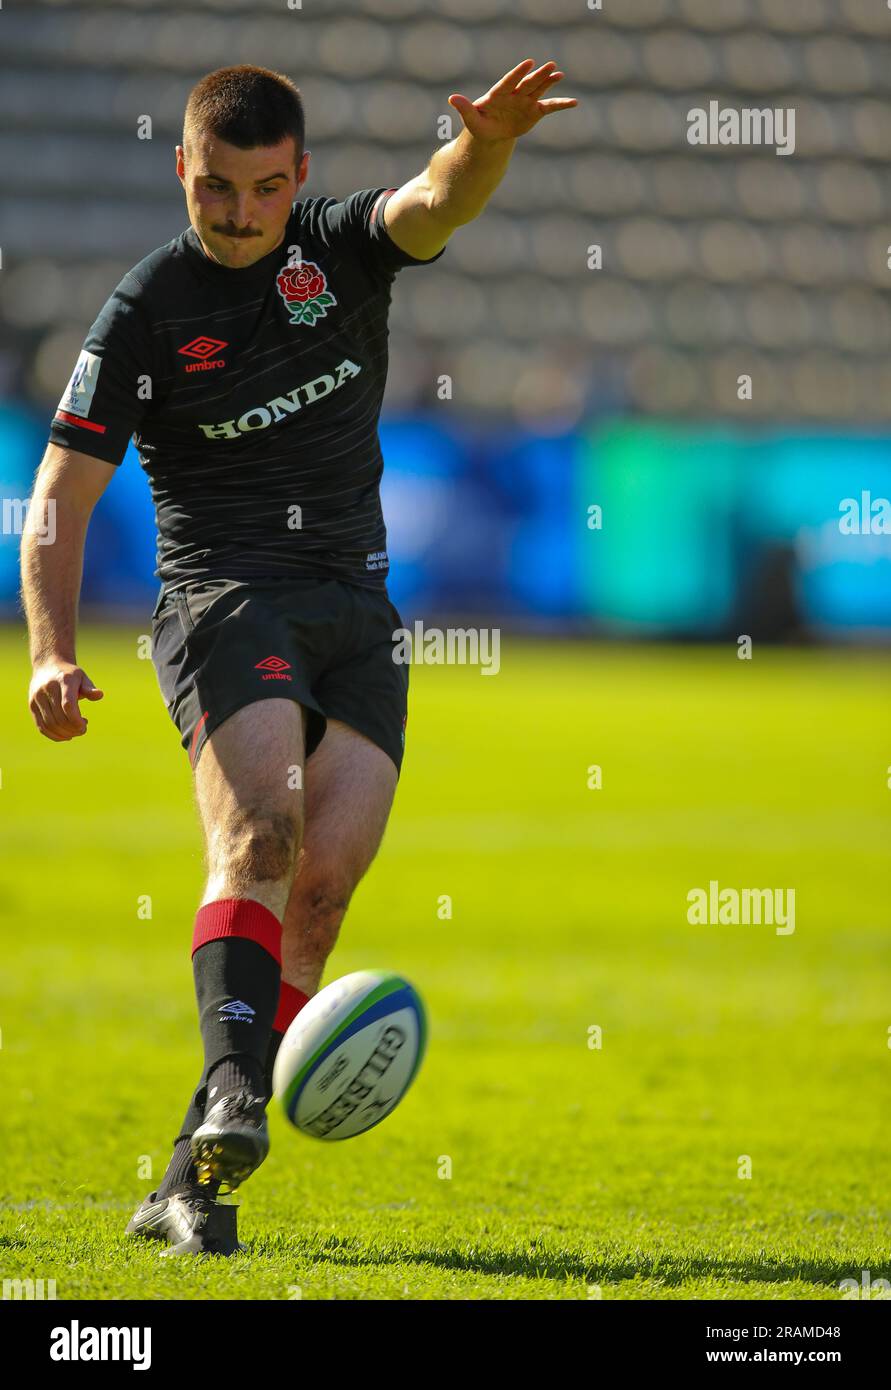 Cape Town, SOUTH AFRICA - Tuesday 04 July 2023, Connor Slevin of England during the World Rugby U20 Championship match between Australia and England at Athlone Stadium in Cape Town, South Africa. Stock Photo